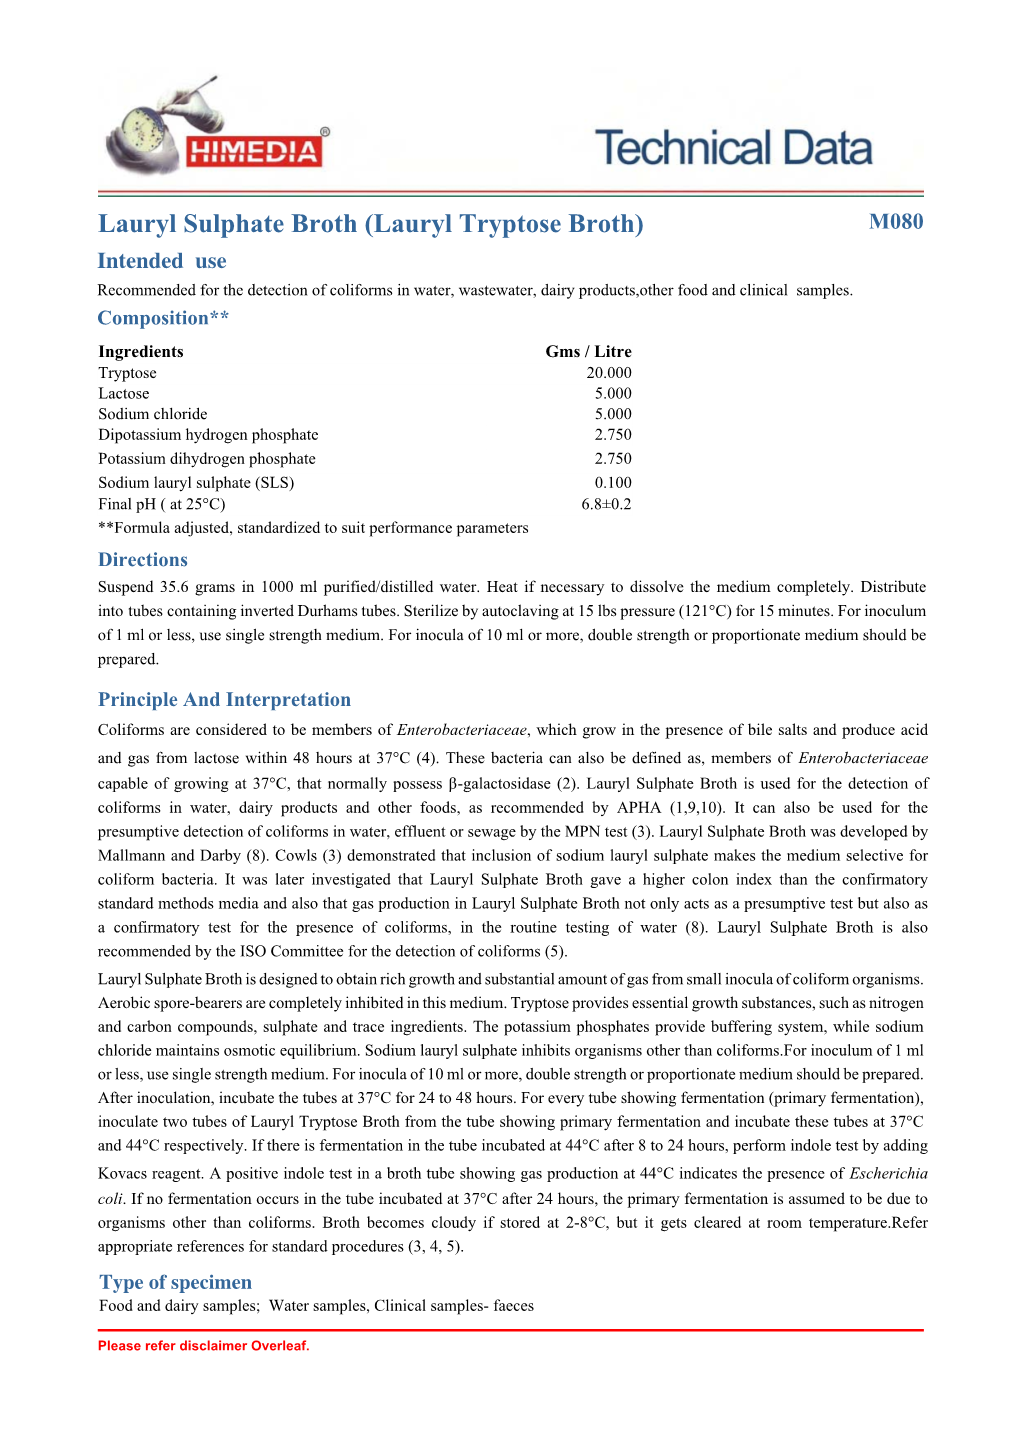 Lauryl Tryptose Broth) M080 Intended Use Recommended for the Detection of Coliforms in Water, Wastewater, Dairy Products,Other Food and Clinical Samples